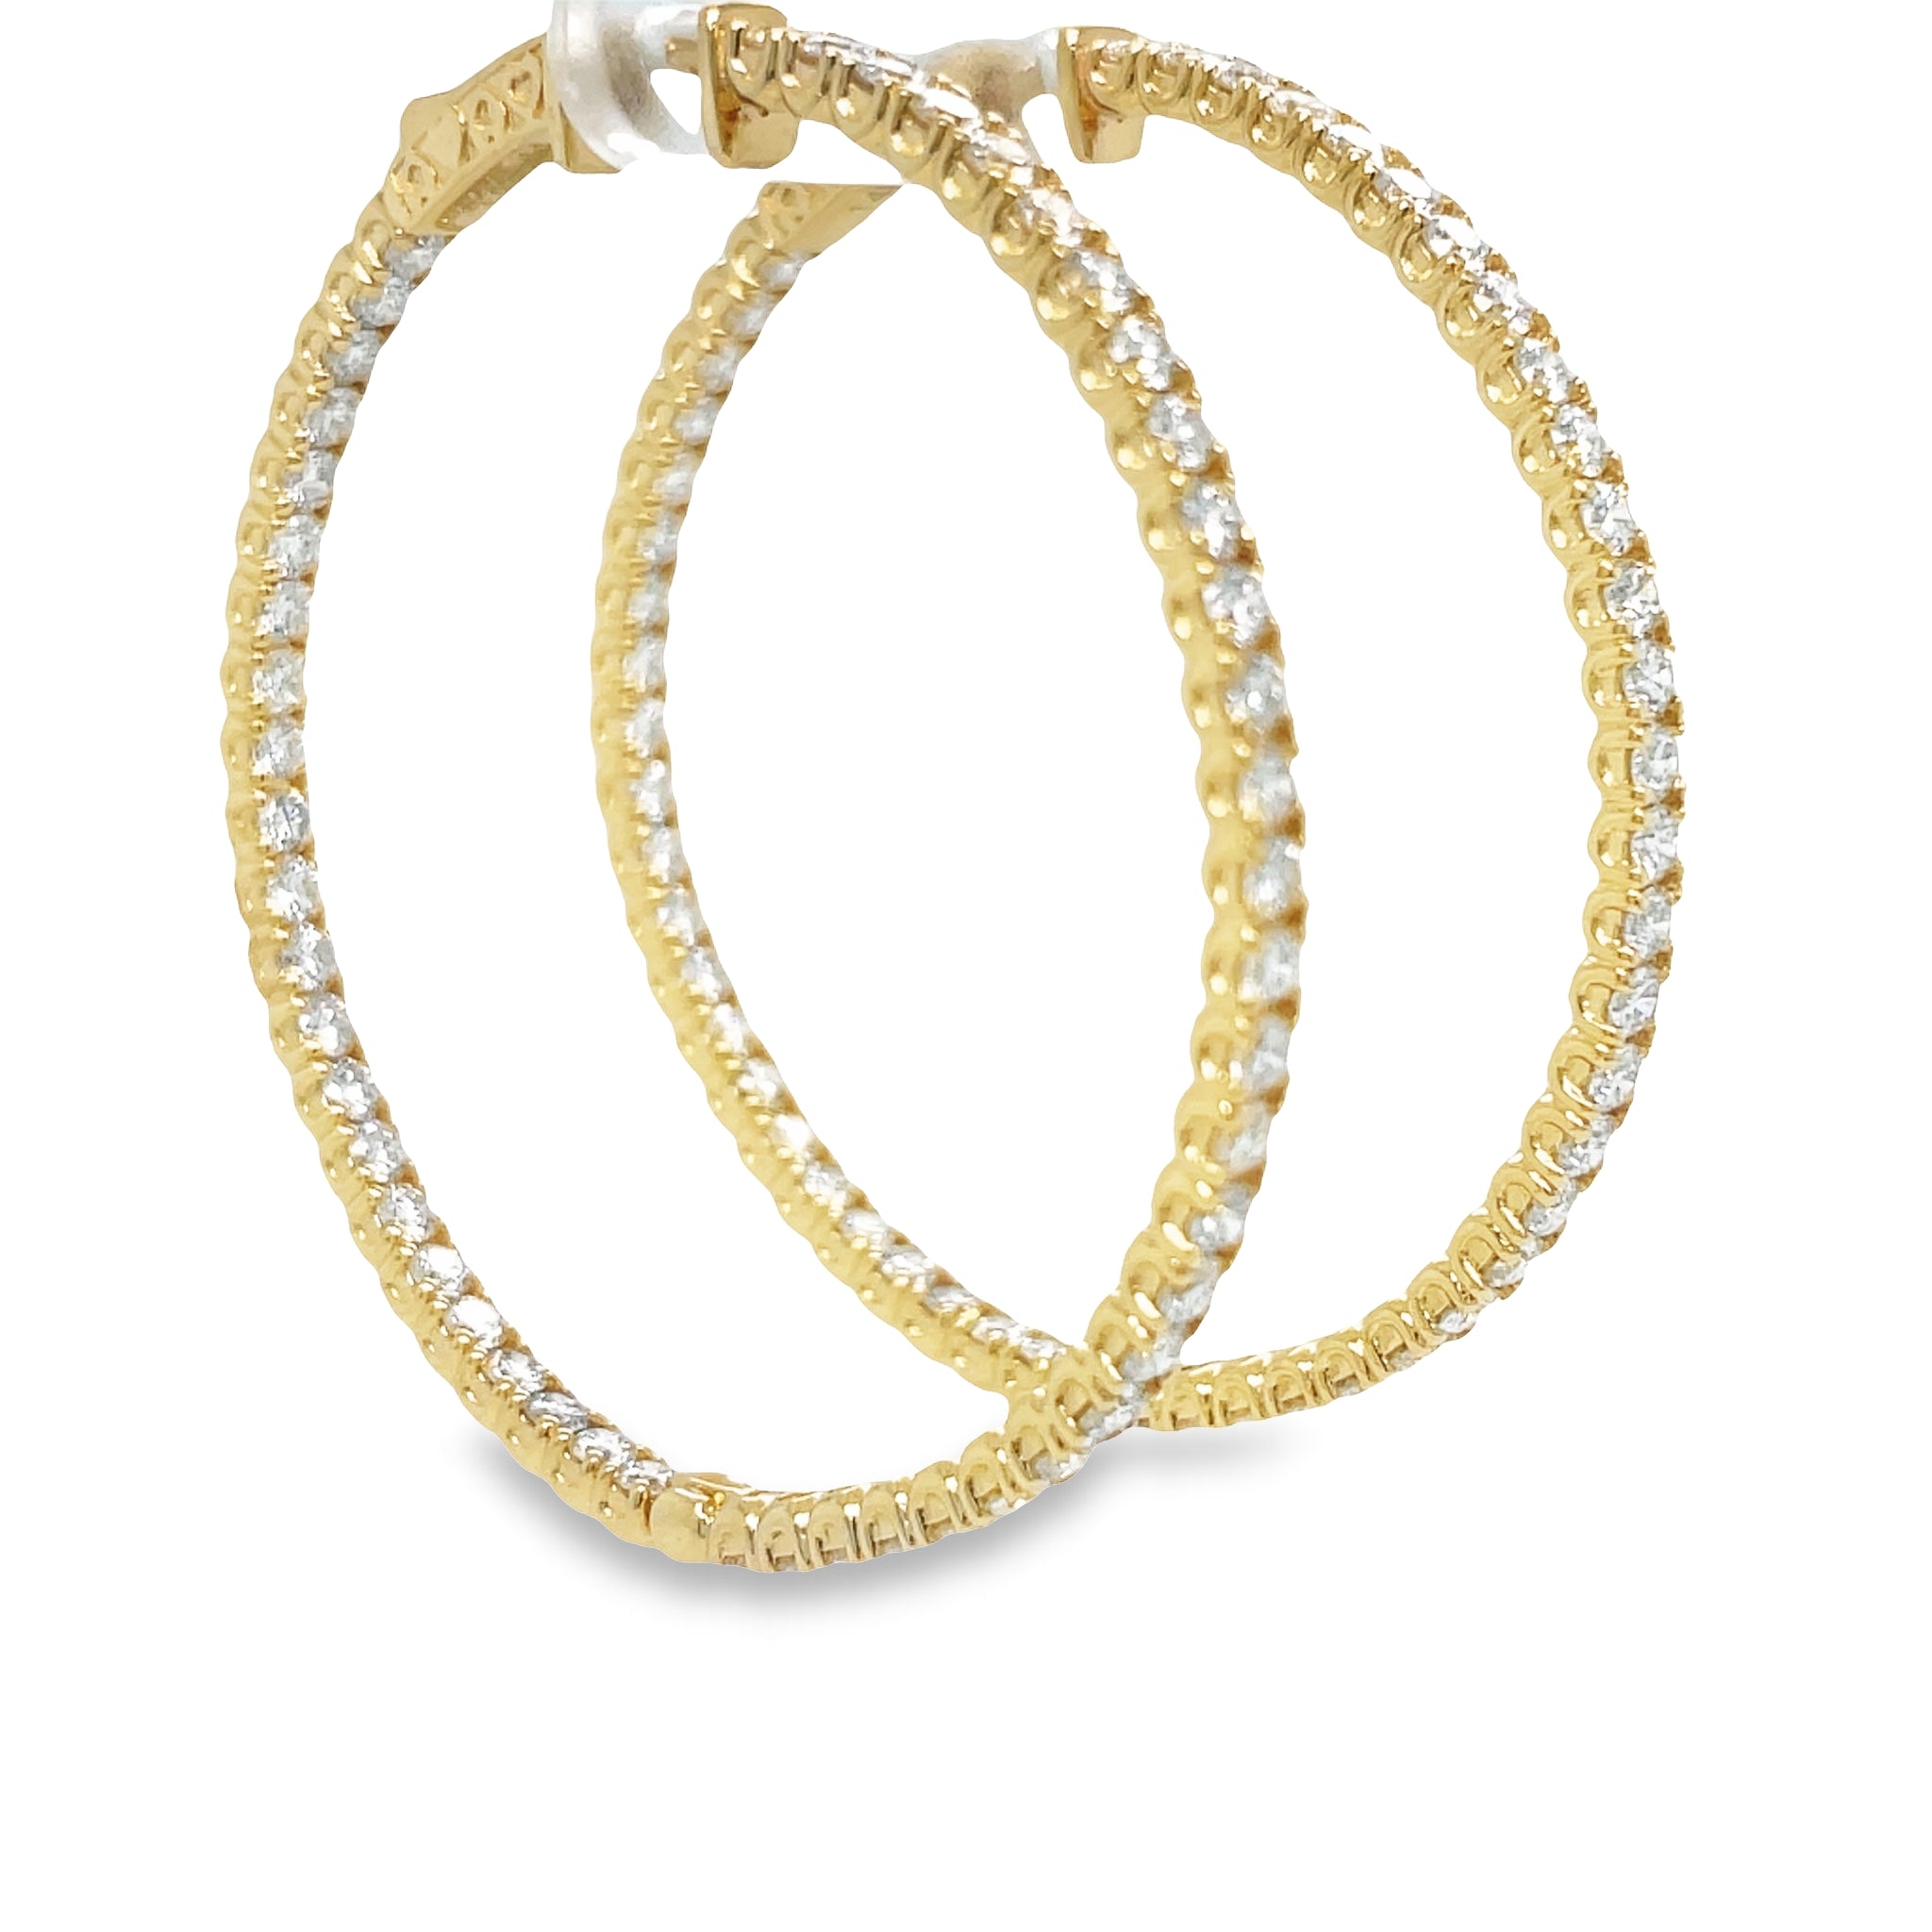 These Large Hoop Earrings feature 5.25 ct Round diamonds of F/G color and VS1 clarity. The hoops are 3.00 mm thick and 2" long, crafted from 14k yellow gold with a secure lock clasp. Lever back system ensures the earrings are easy to put on and take off.